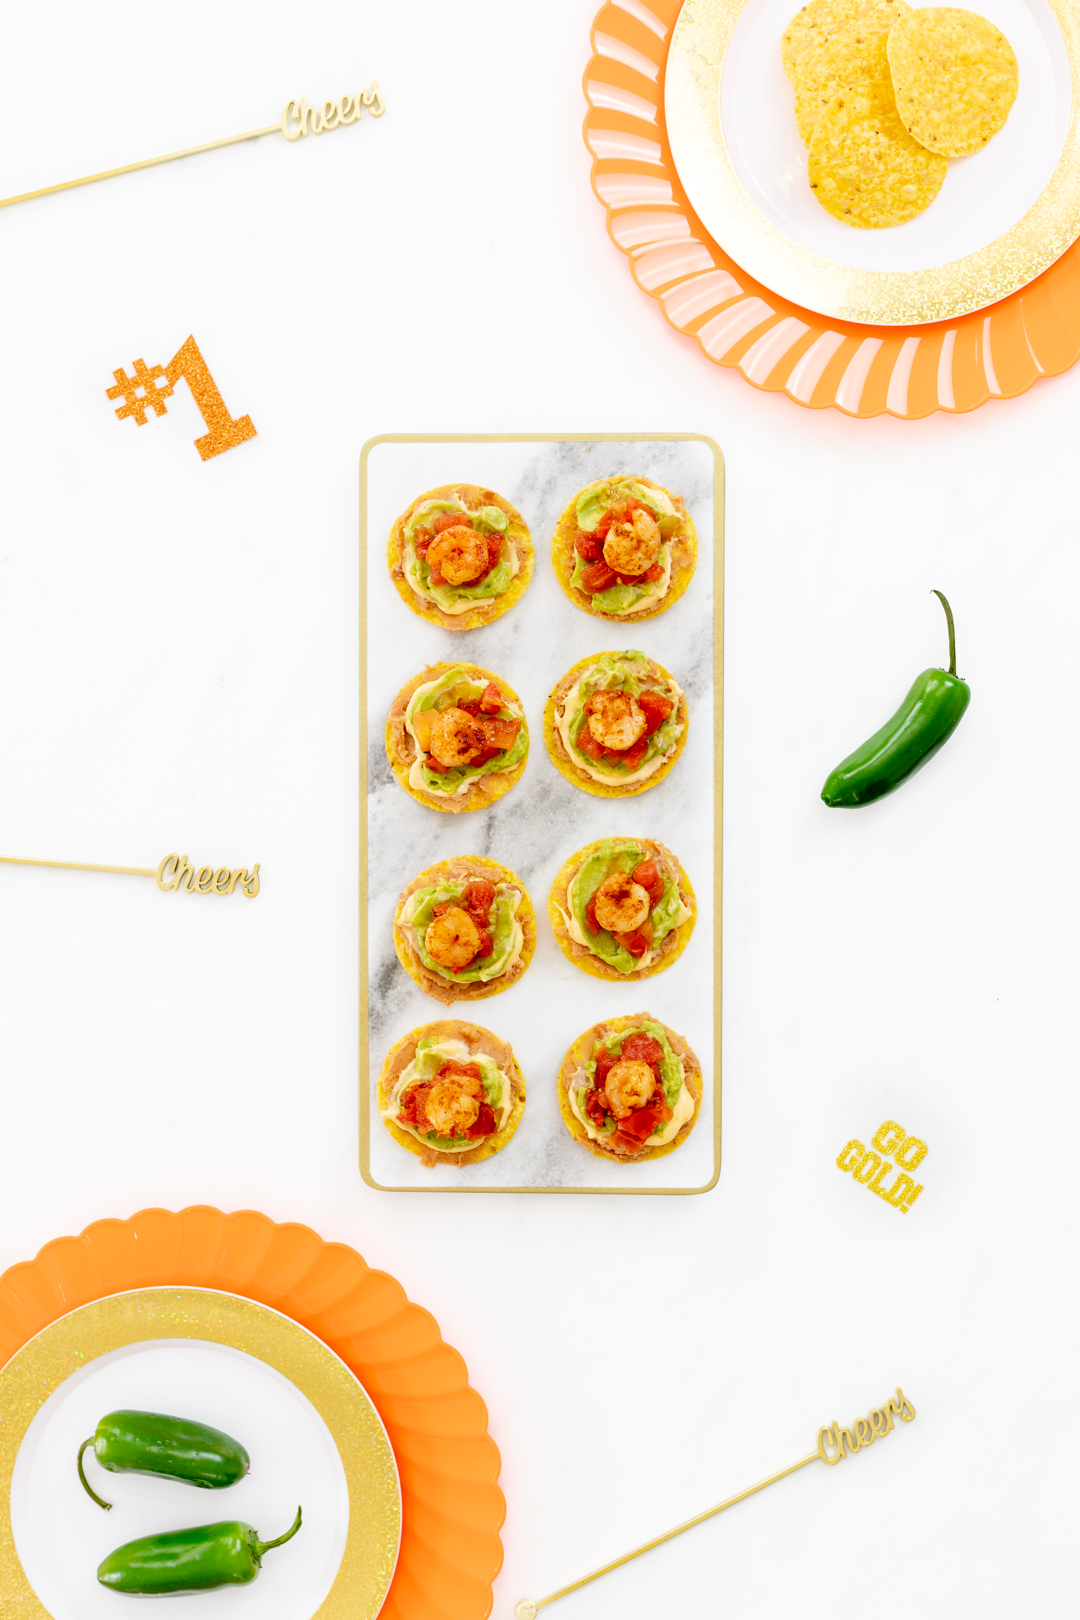 Guacamole, Nacho Cheese, Mexican inspired nacho appetizers